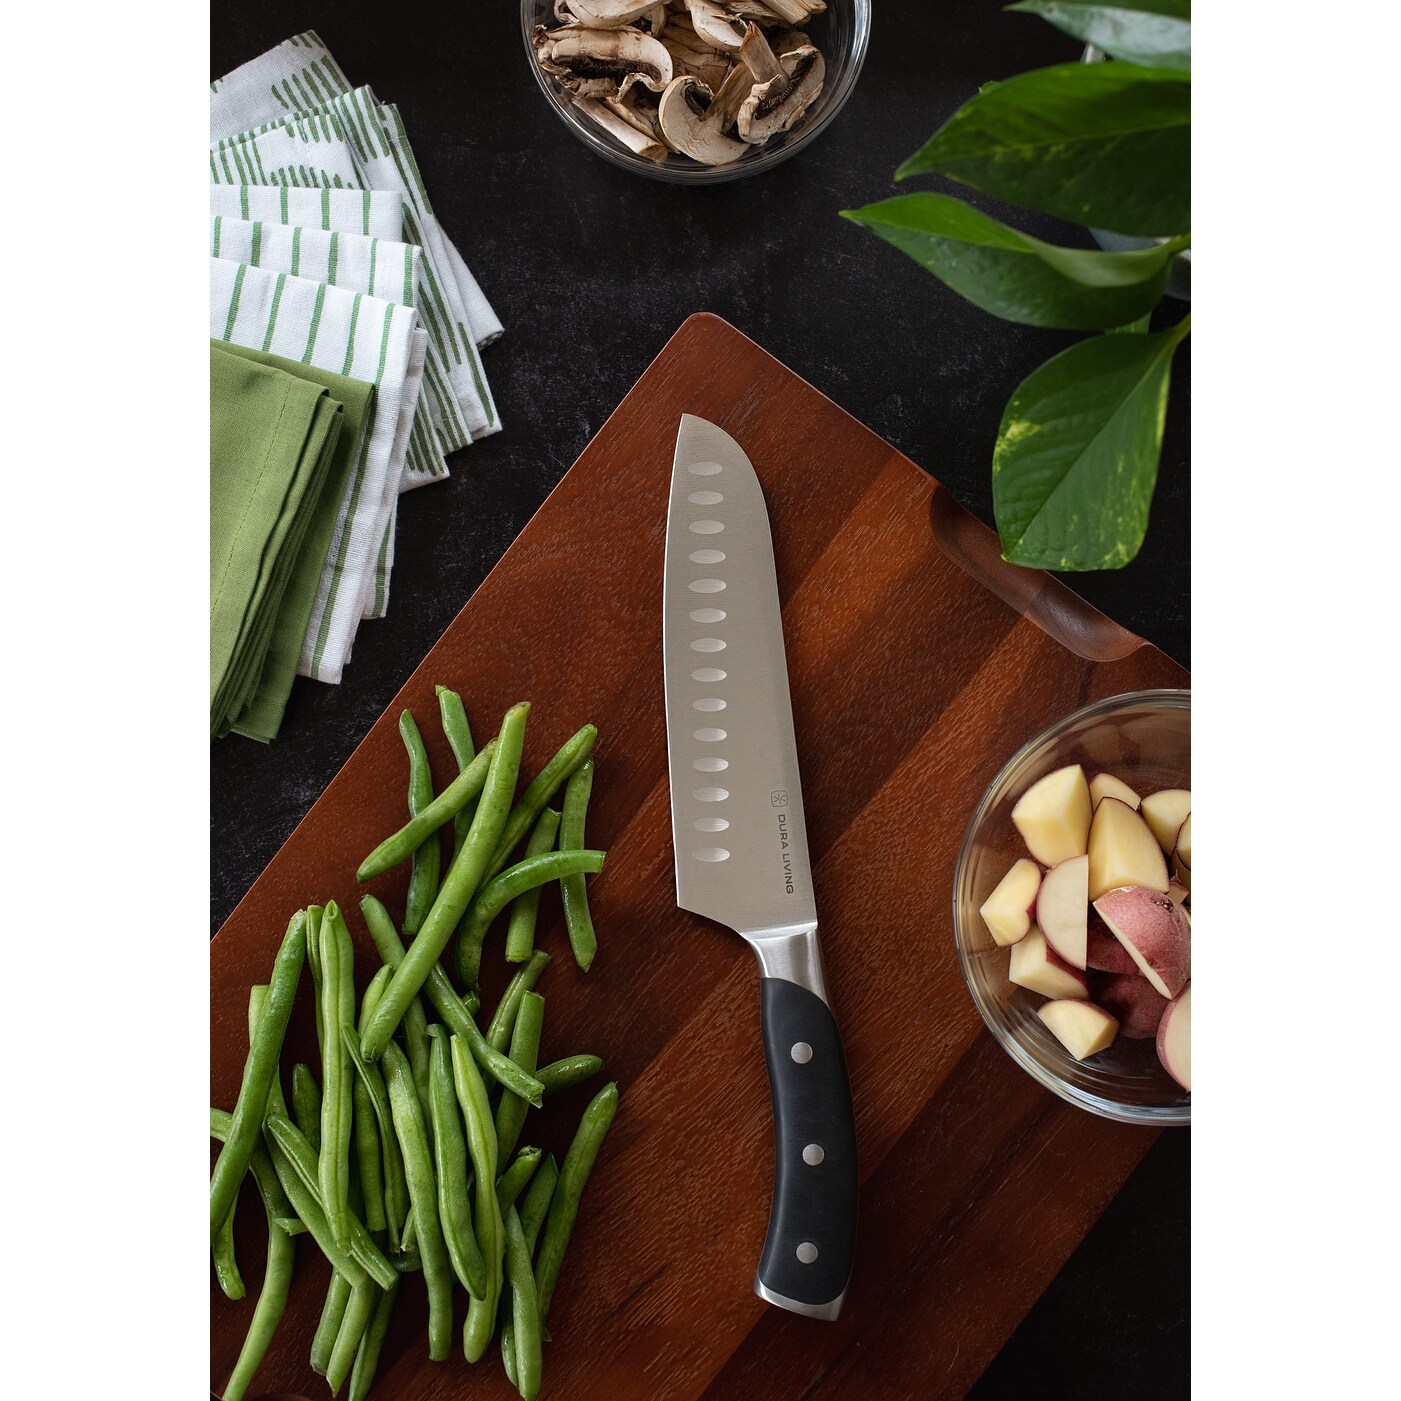 https://ak1.ostkcdn.com/images/products/is/images/direct/bf907efbf6ba4ba159a97d373e9137601536fa84/Dura-Living-Elite-7-inch-Santoku-Knife---Forged-High-Carbon-German-Stainless-Steel-Blade%2C-Black.jpg